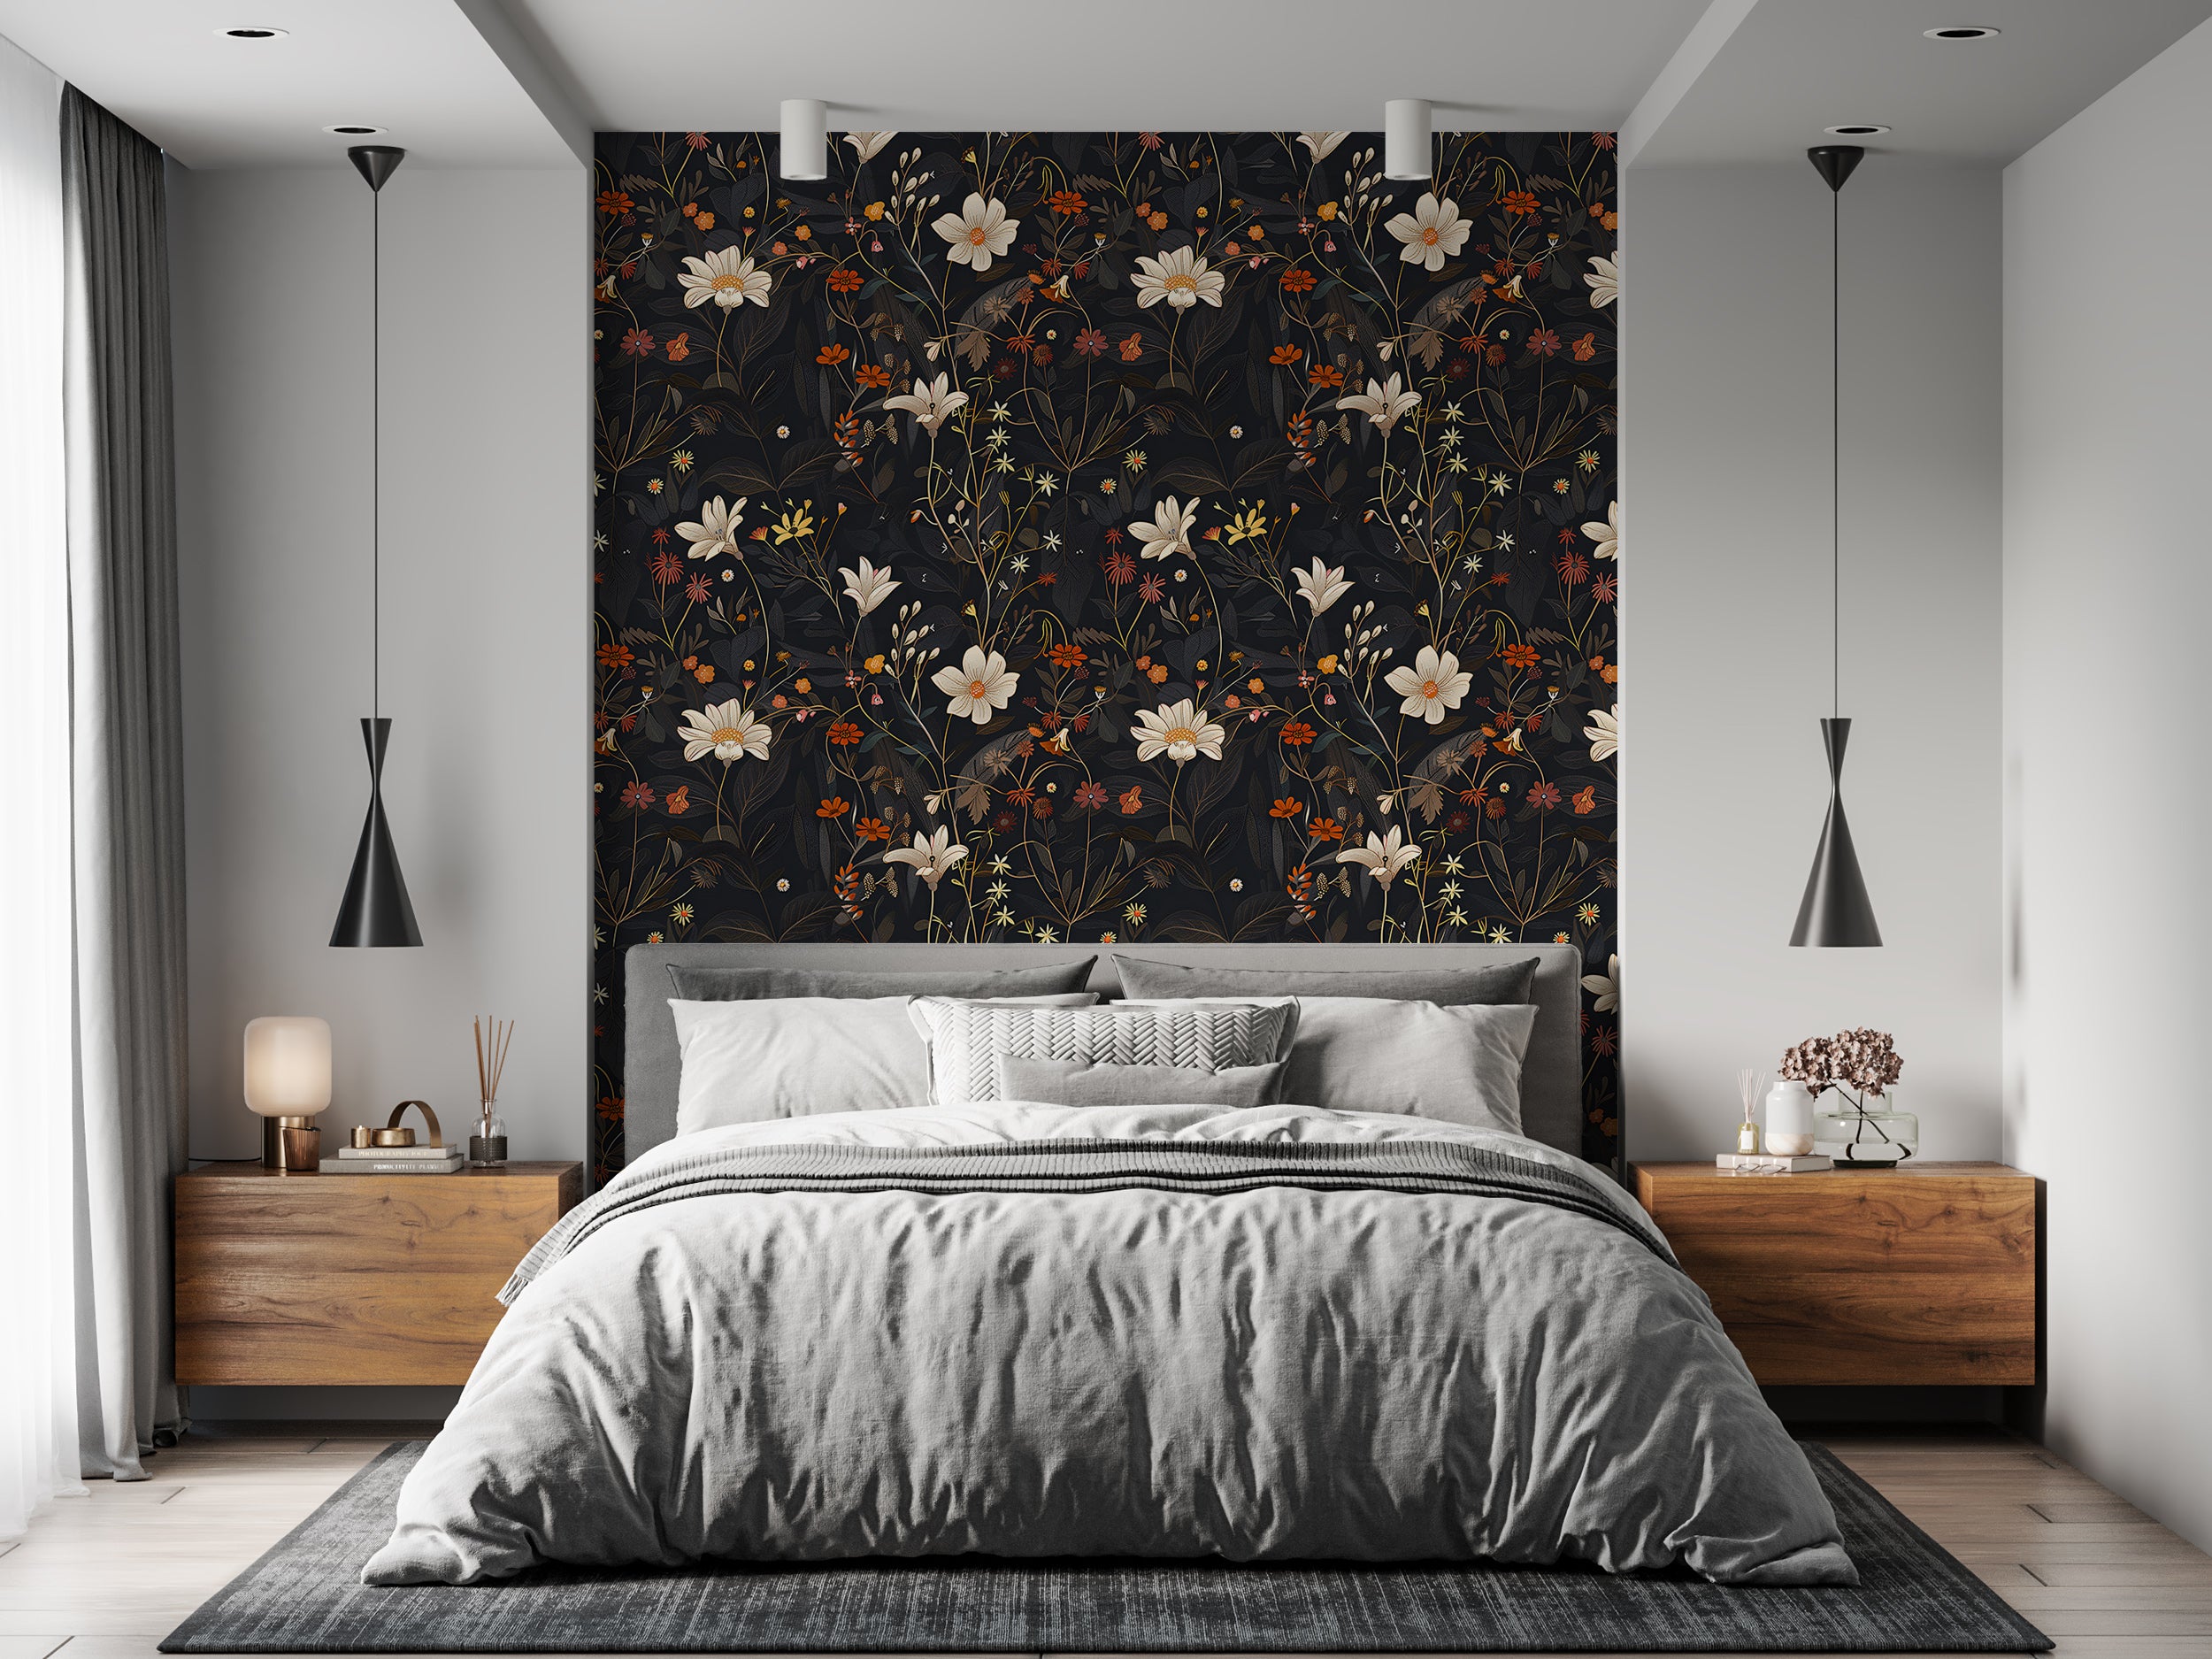 Wild Flowers Dark Wallpaper, Meadow Flower Peel and Stick Wall Decal, Black and Red Botanical Wallpaper, Dark Field Floral Decor